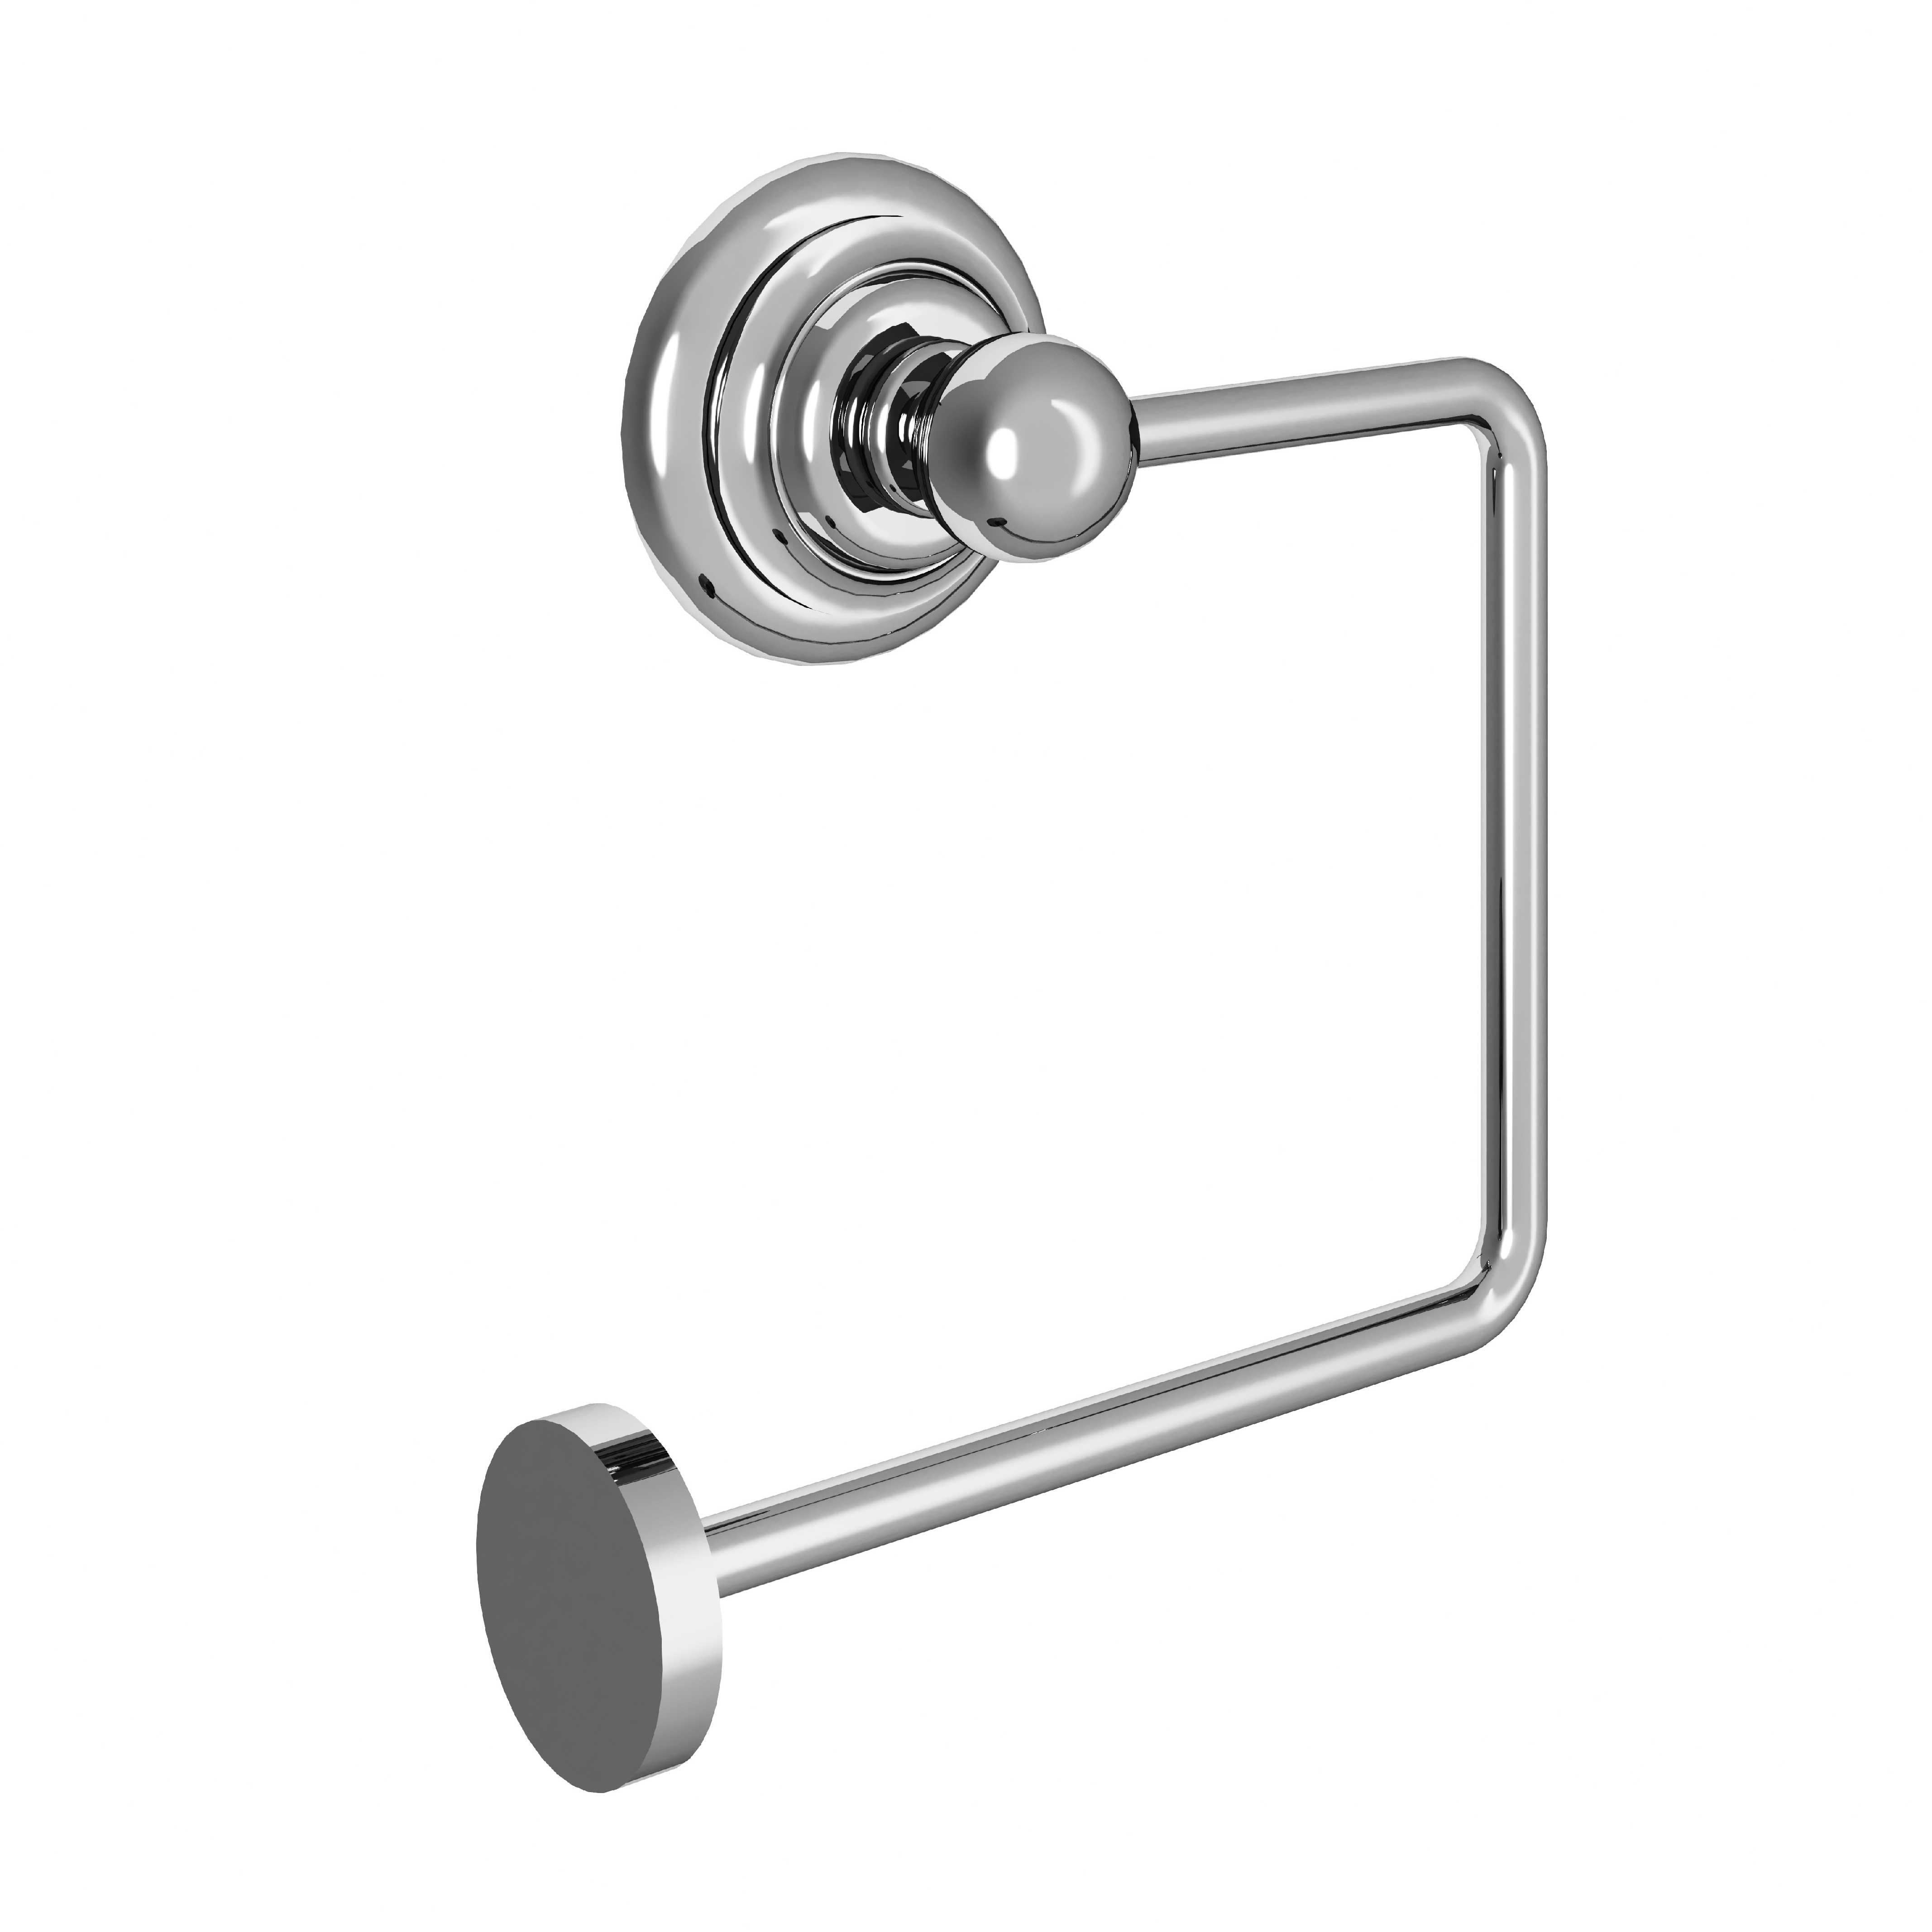 M04-504 Toilet roll holder without cover